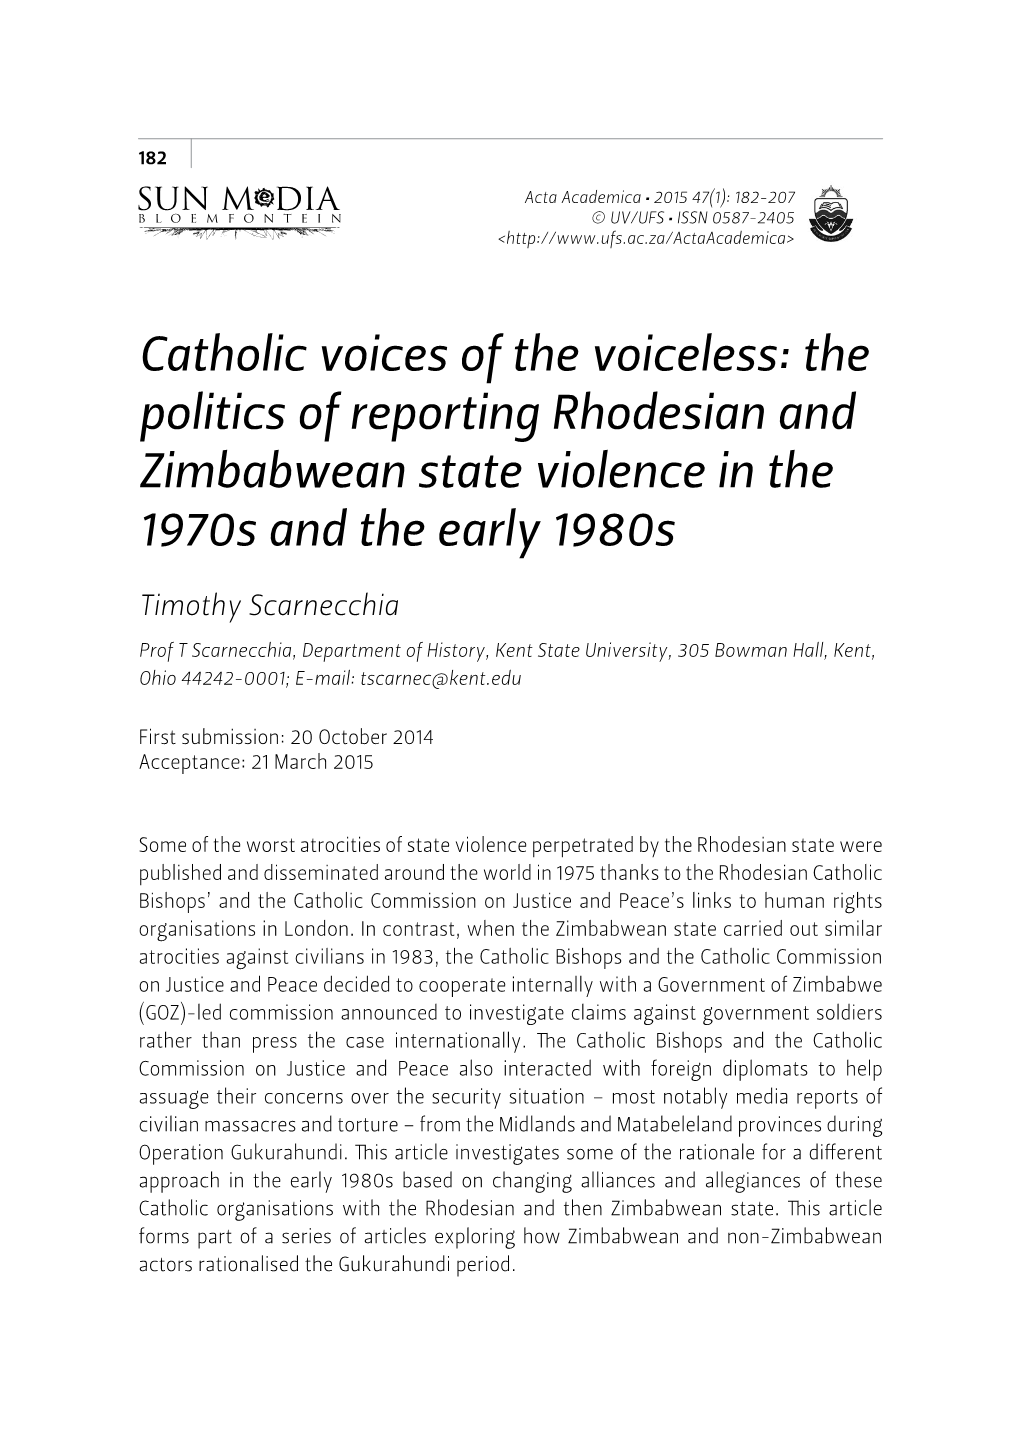 Catholic Voices of the Voiceless: the Politics of Reporting Rhodesian and Zimbabwean State Violence in the 1970S and the Early 1980S